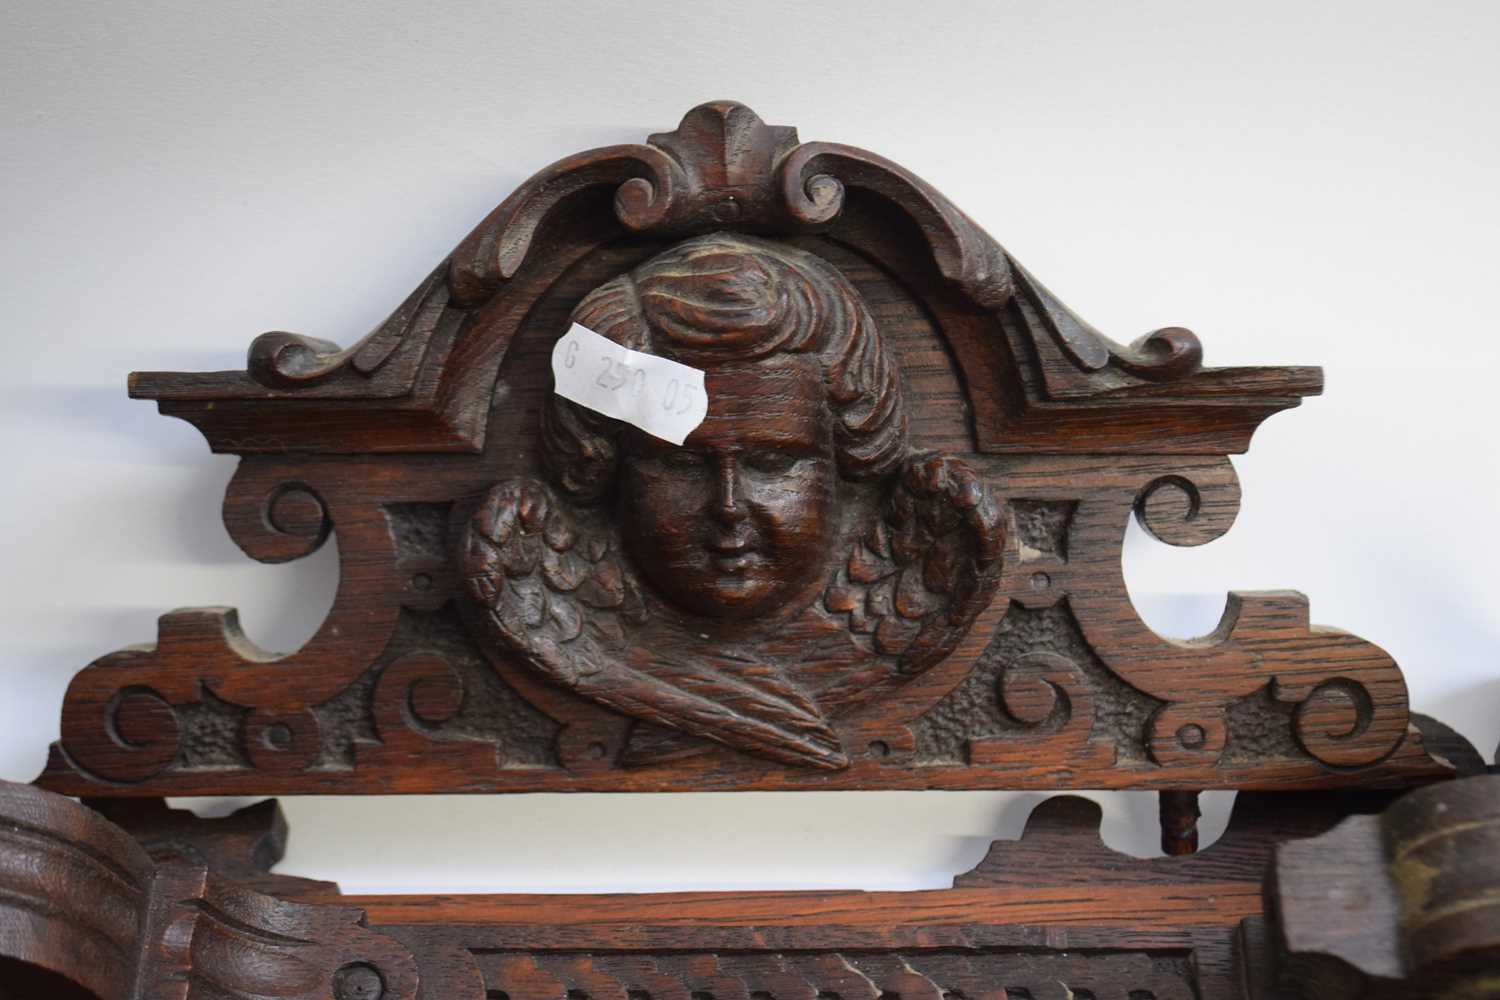 Late 19th Century German wall clock with elaborate architectural oak case with figural pediment, - Image 4 of 4